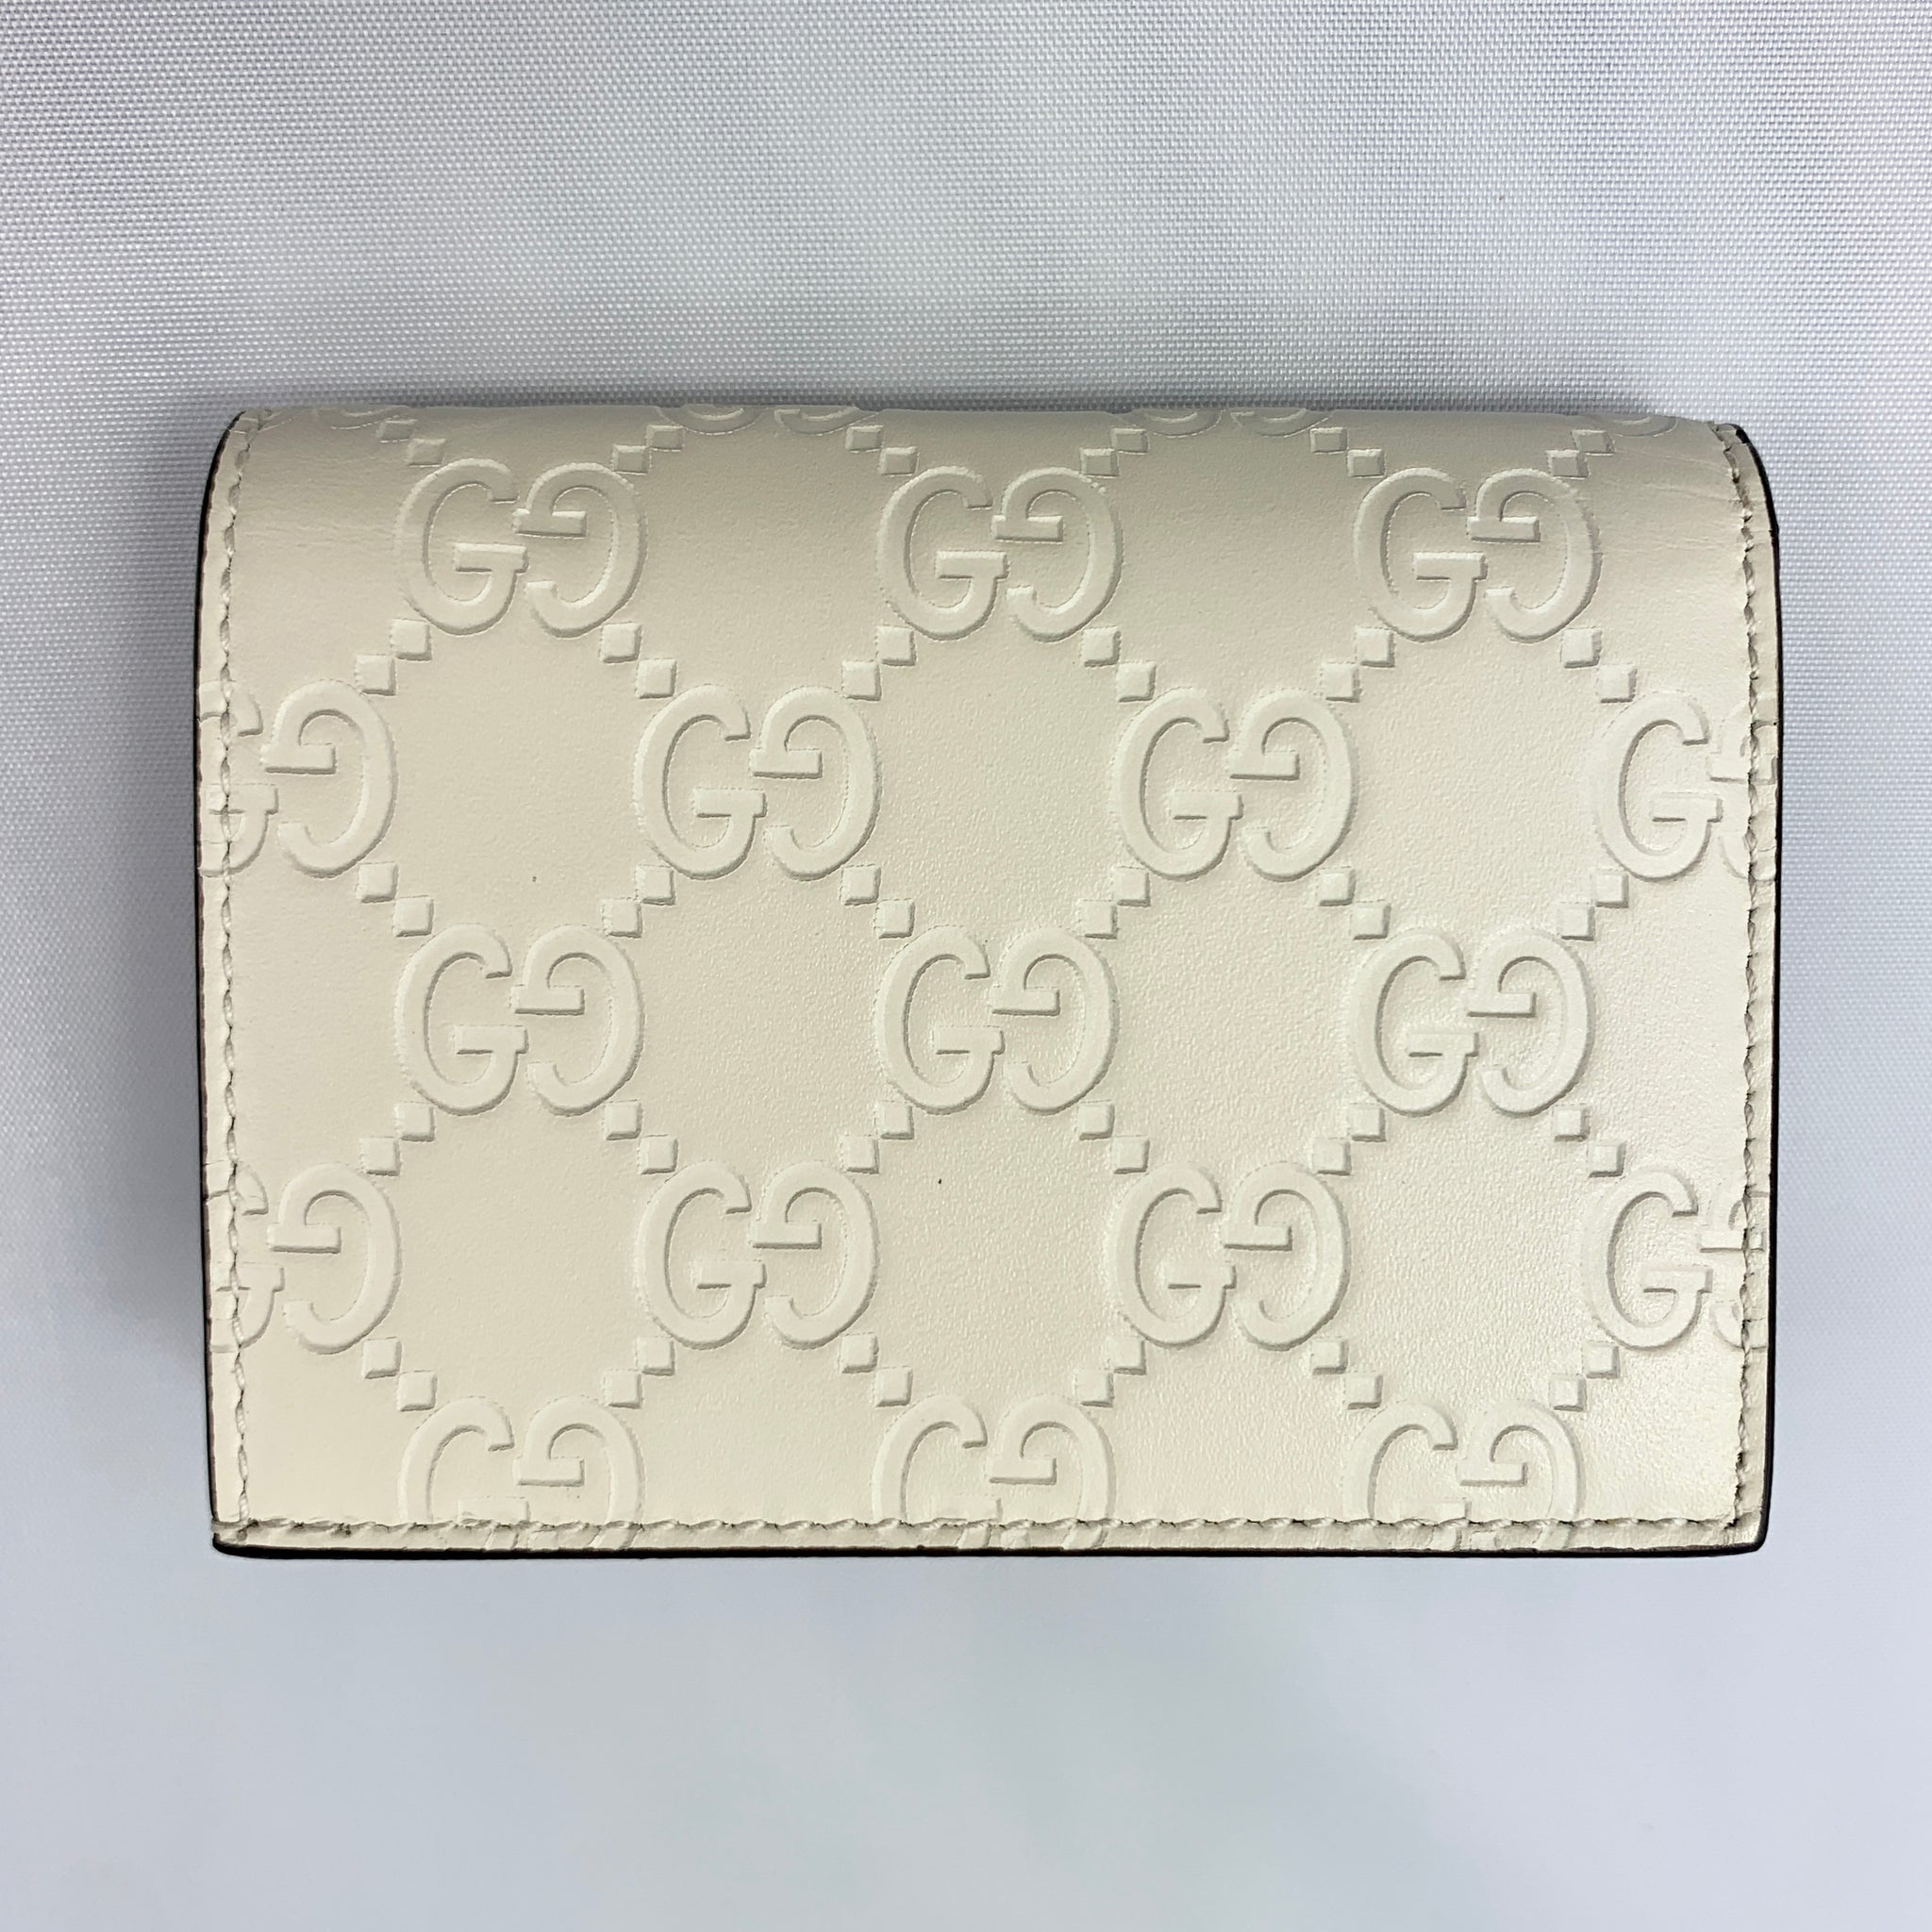 Gucci Wallet White Leather